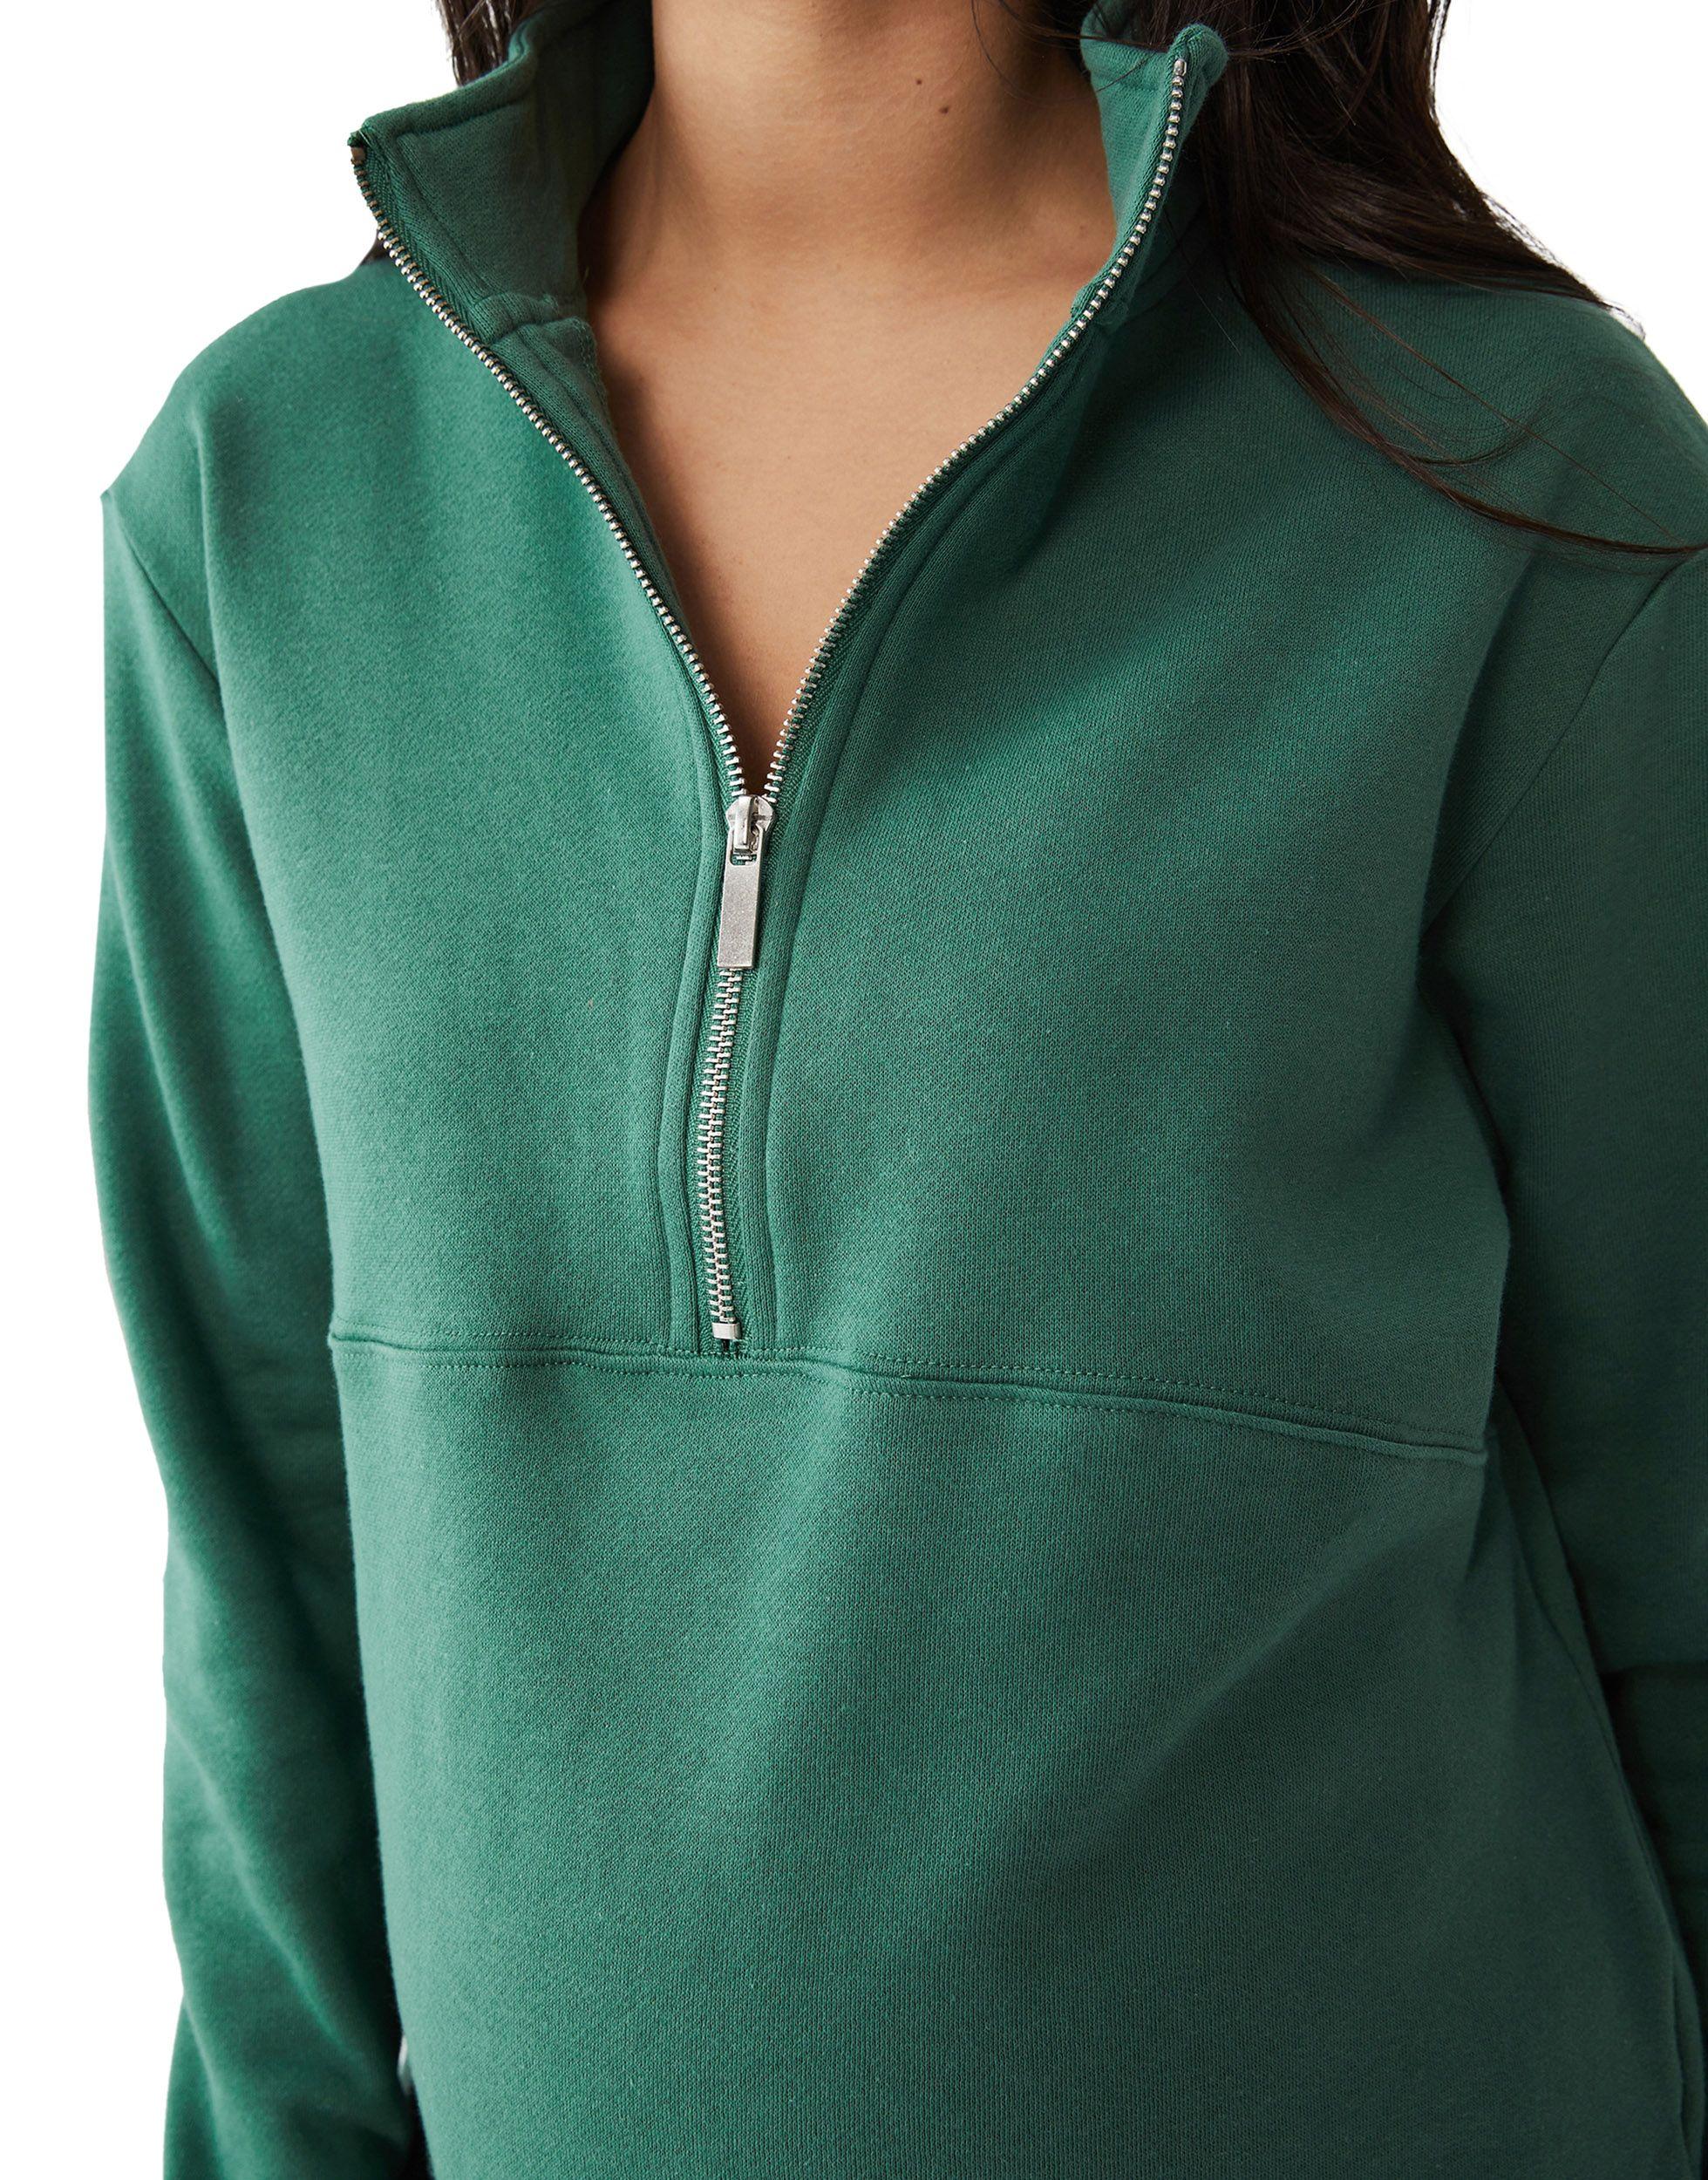 Cotton On Maternity Zip Front Ribbed Fleece in Green